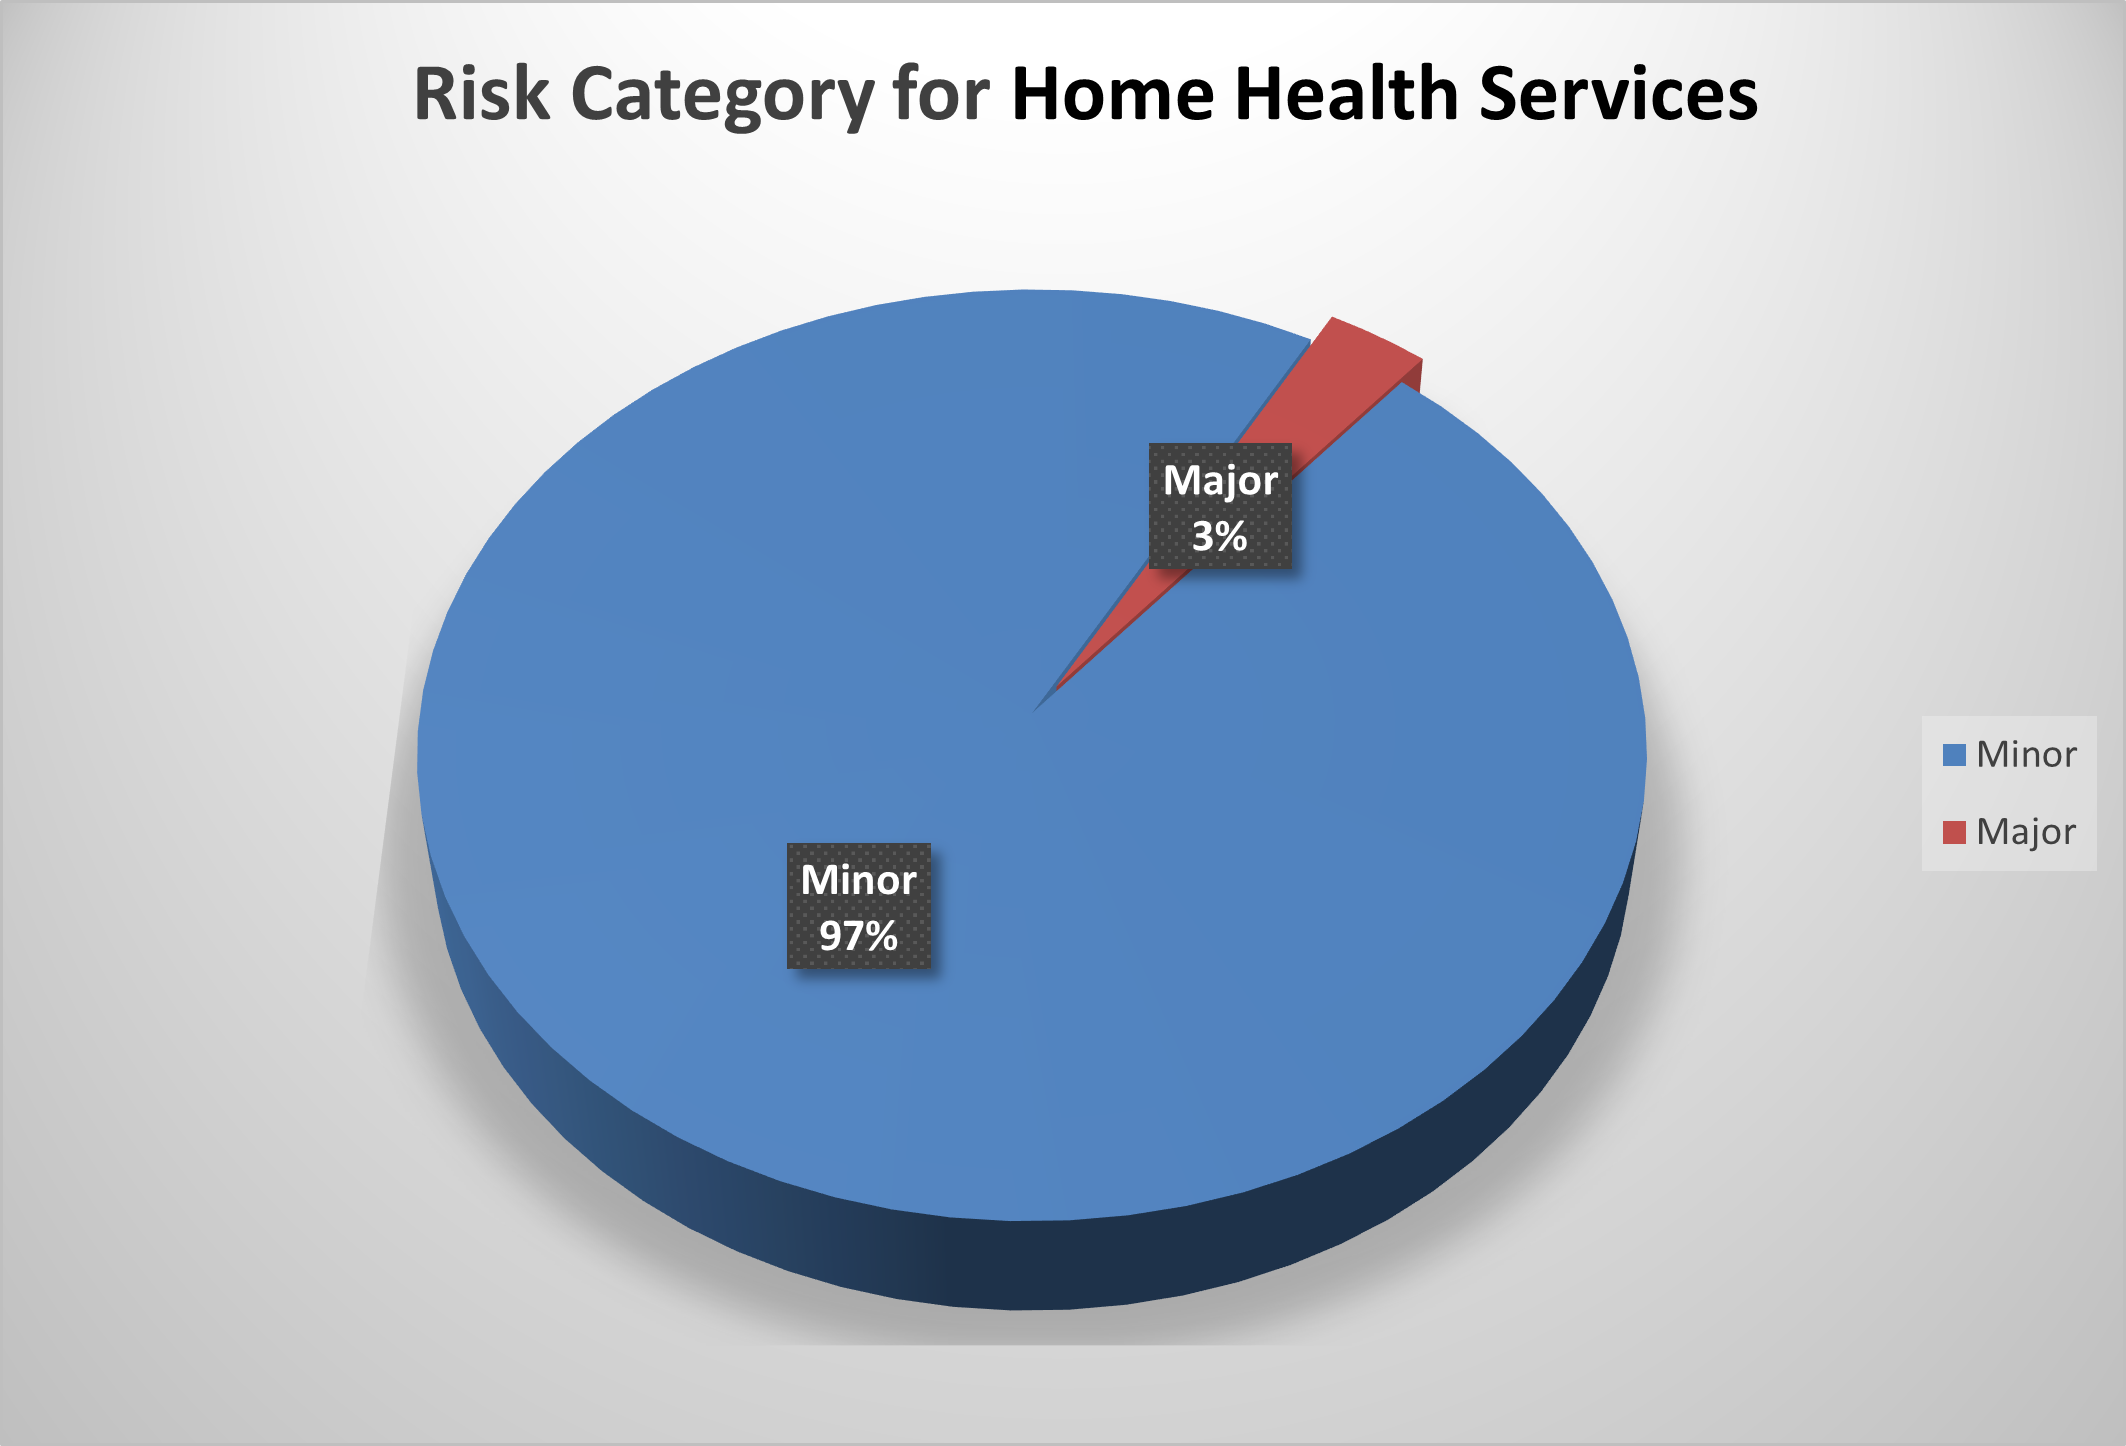 The categories for Home Health Services are defined as: Major 3 percent and 97 percent.